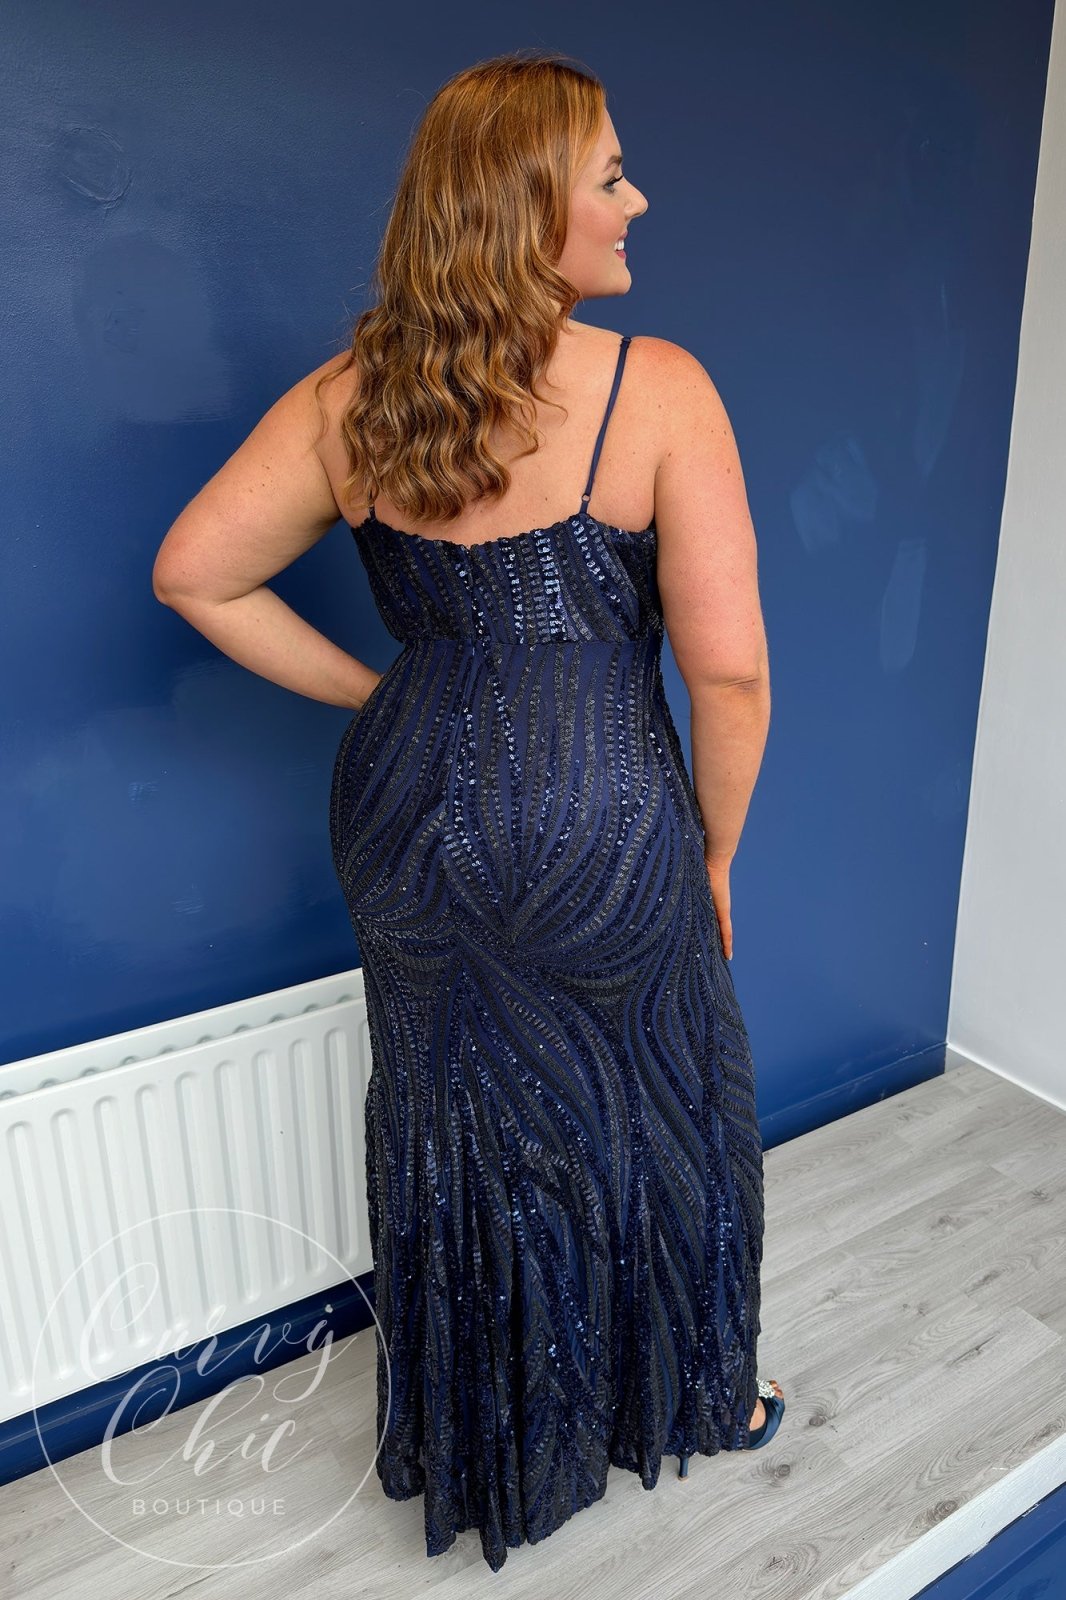 Plus Size Navy Sequin Maxi Dress with Spaghetti Straps - Curvy Chic Boutique